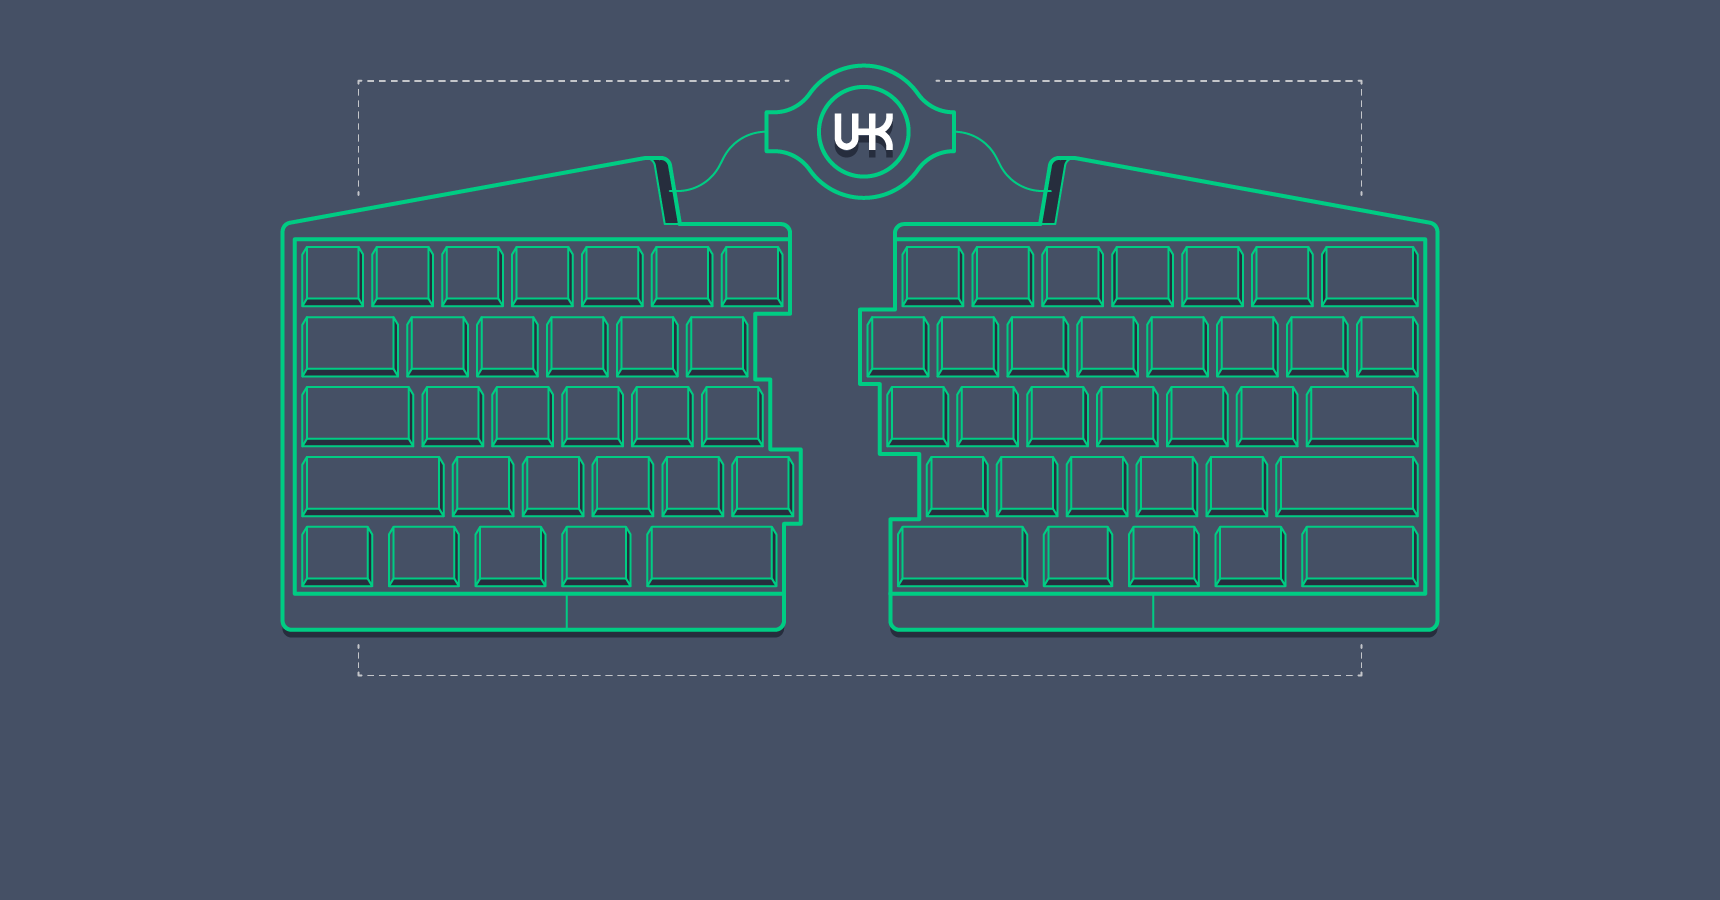 which hand controls the most keys on a standard typewriter or computer keyboard left or right